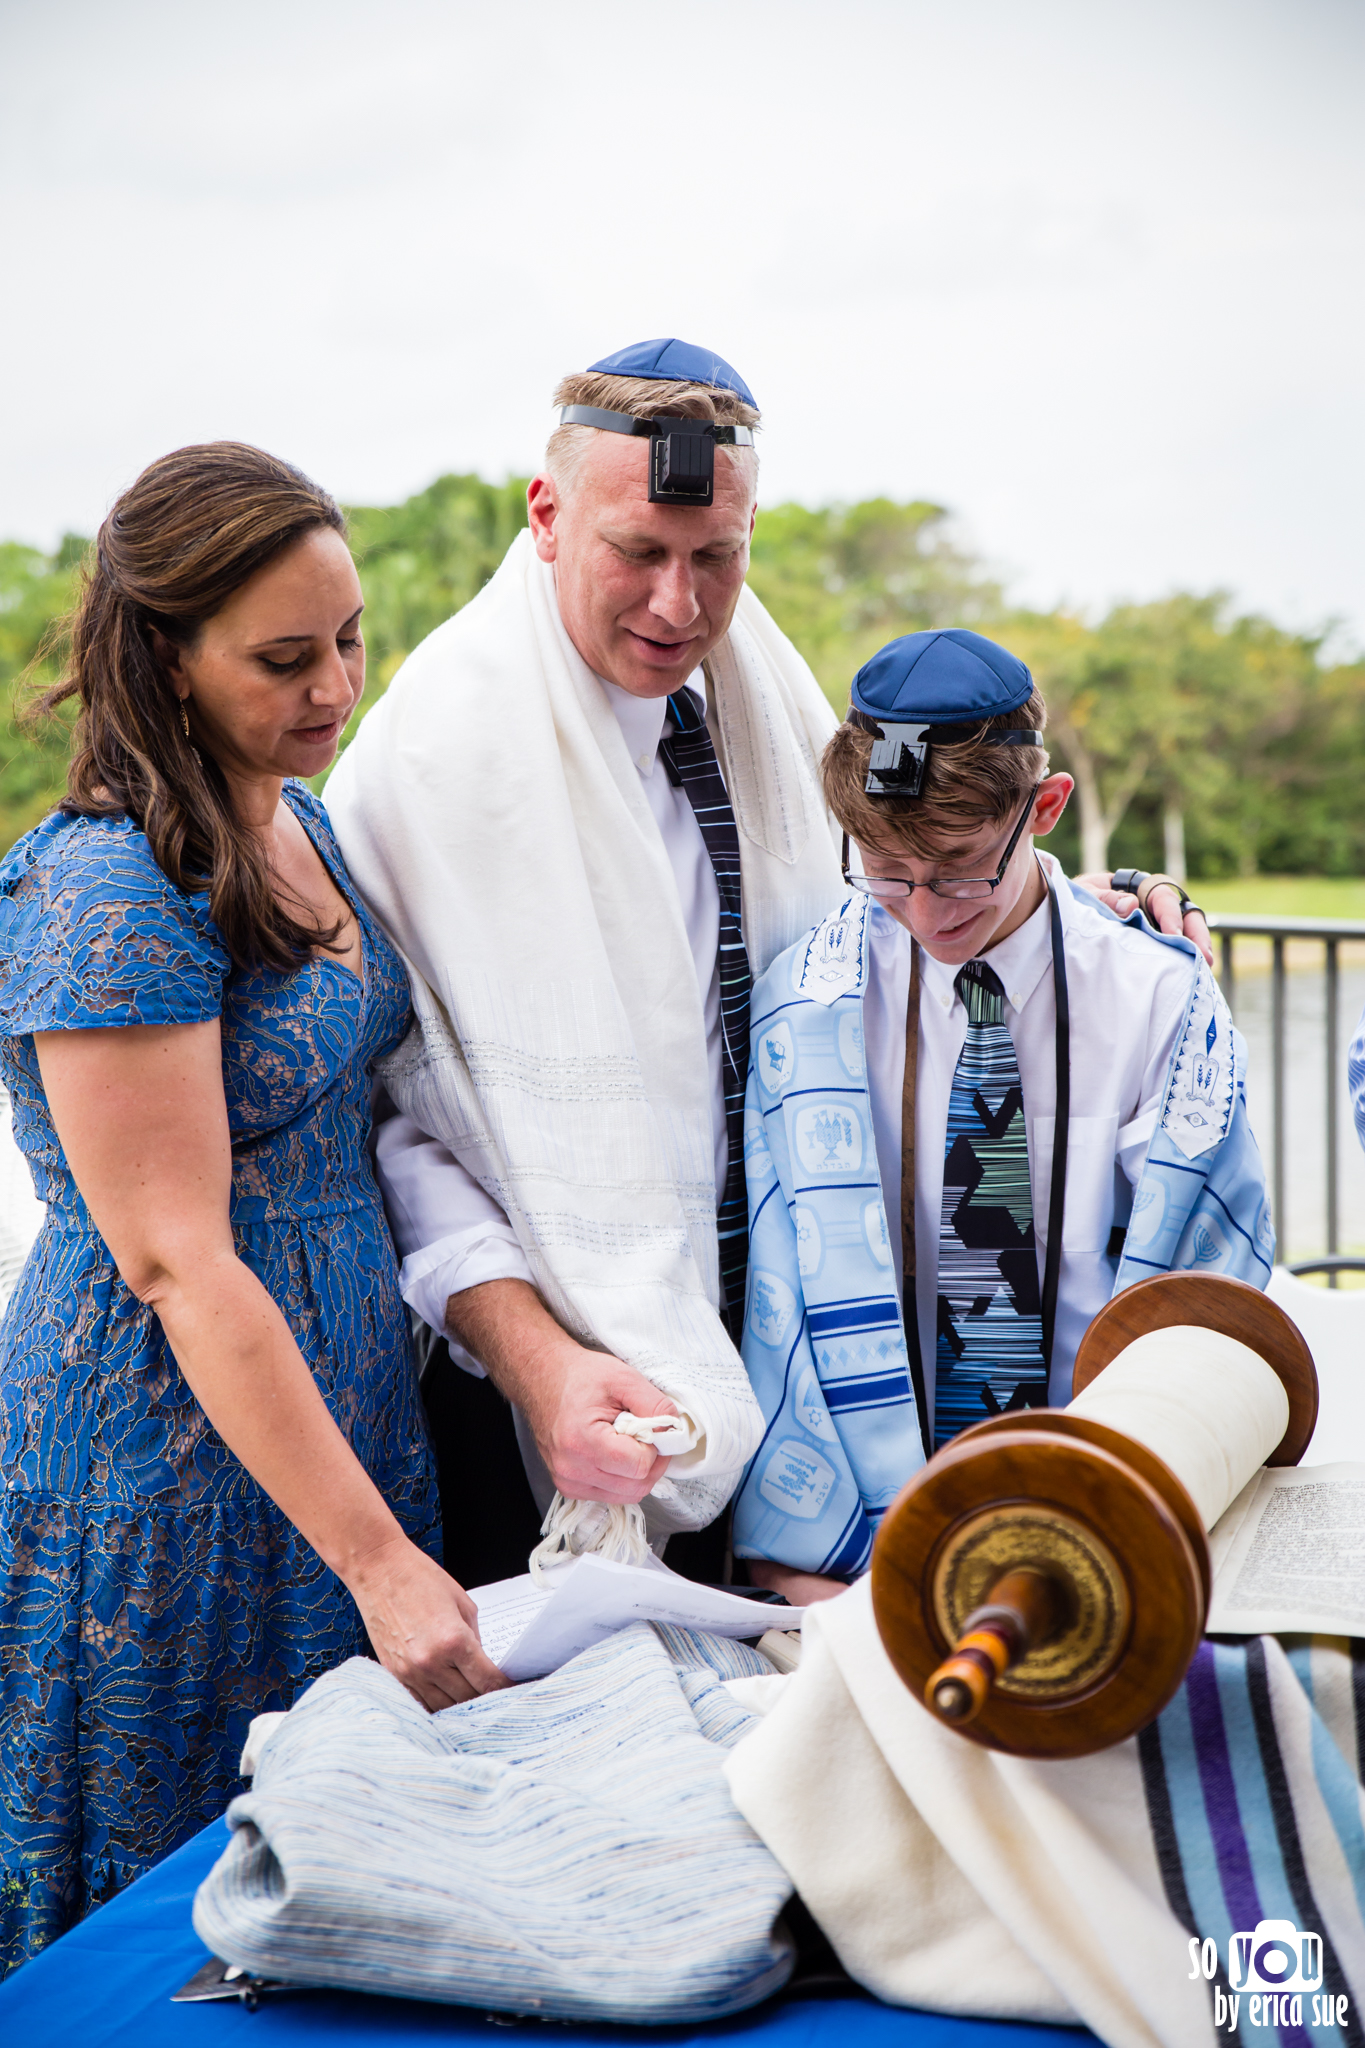 bar-mitzvah-photography-ft-lauderdale-so-you-by-erica-sue-0440.jpg